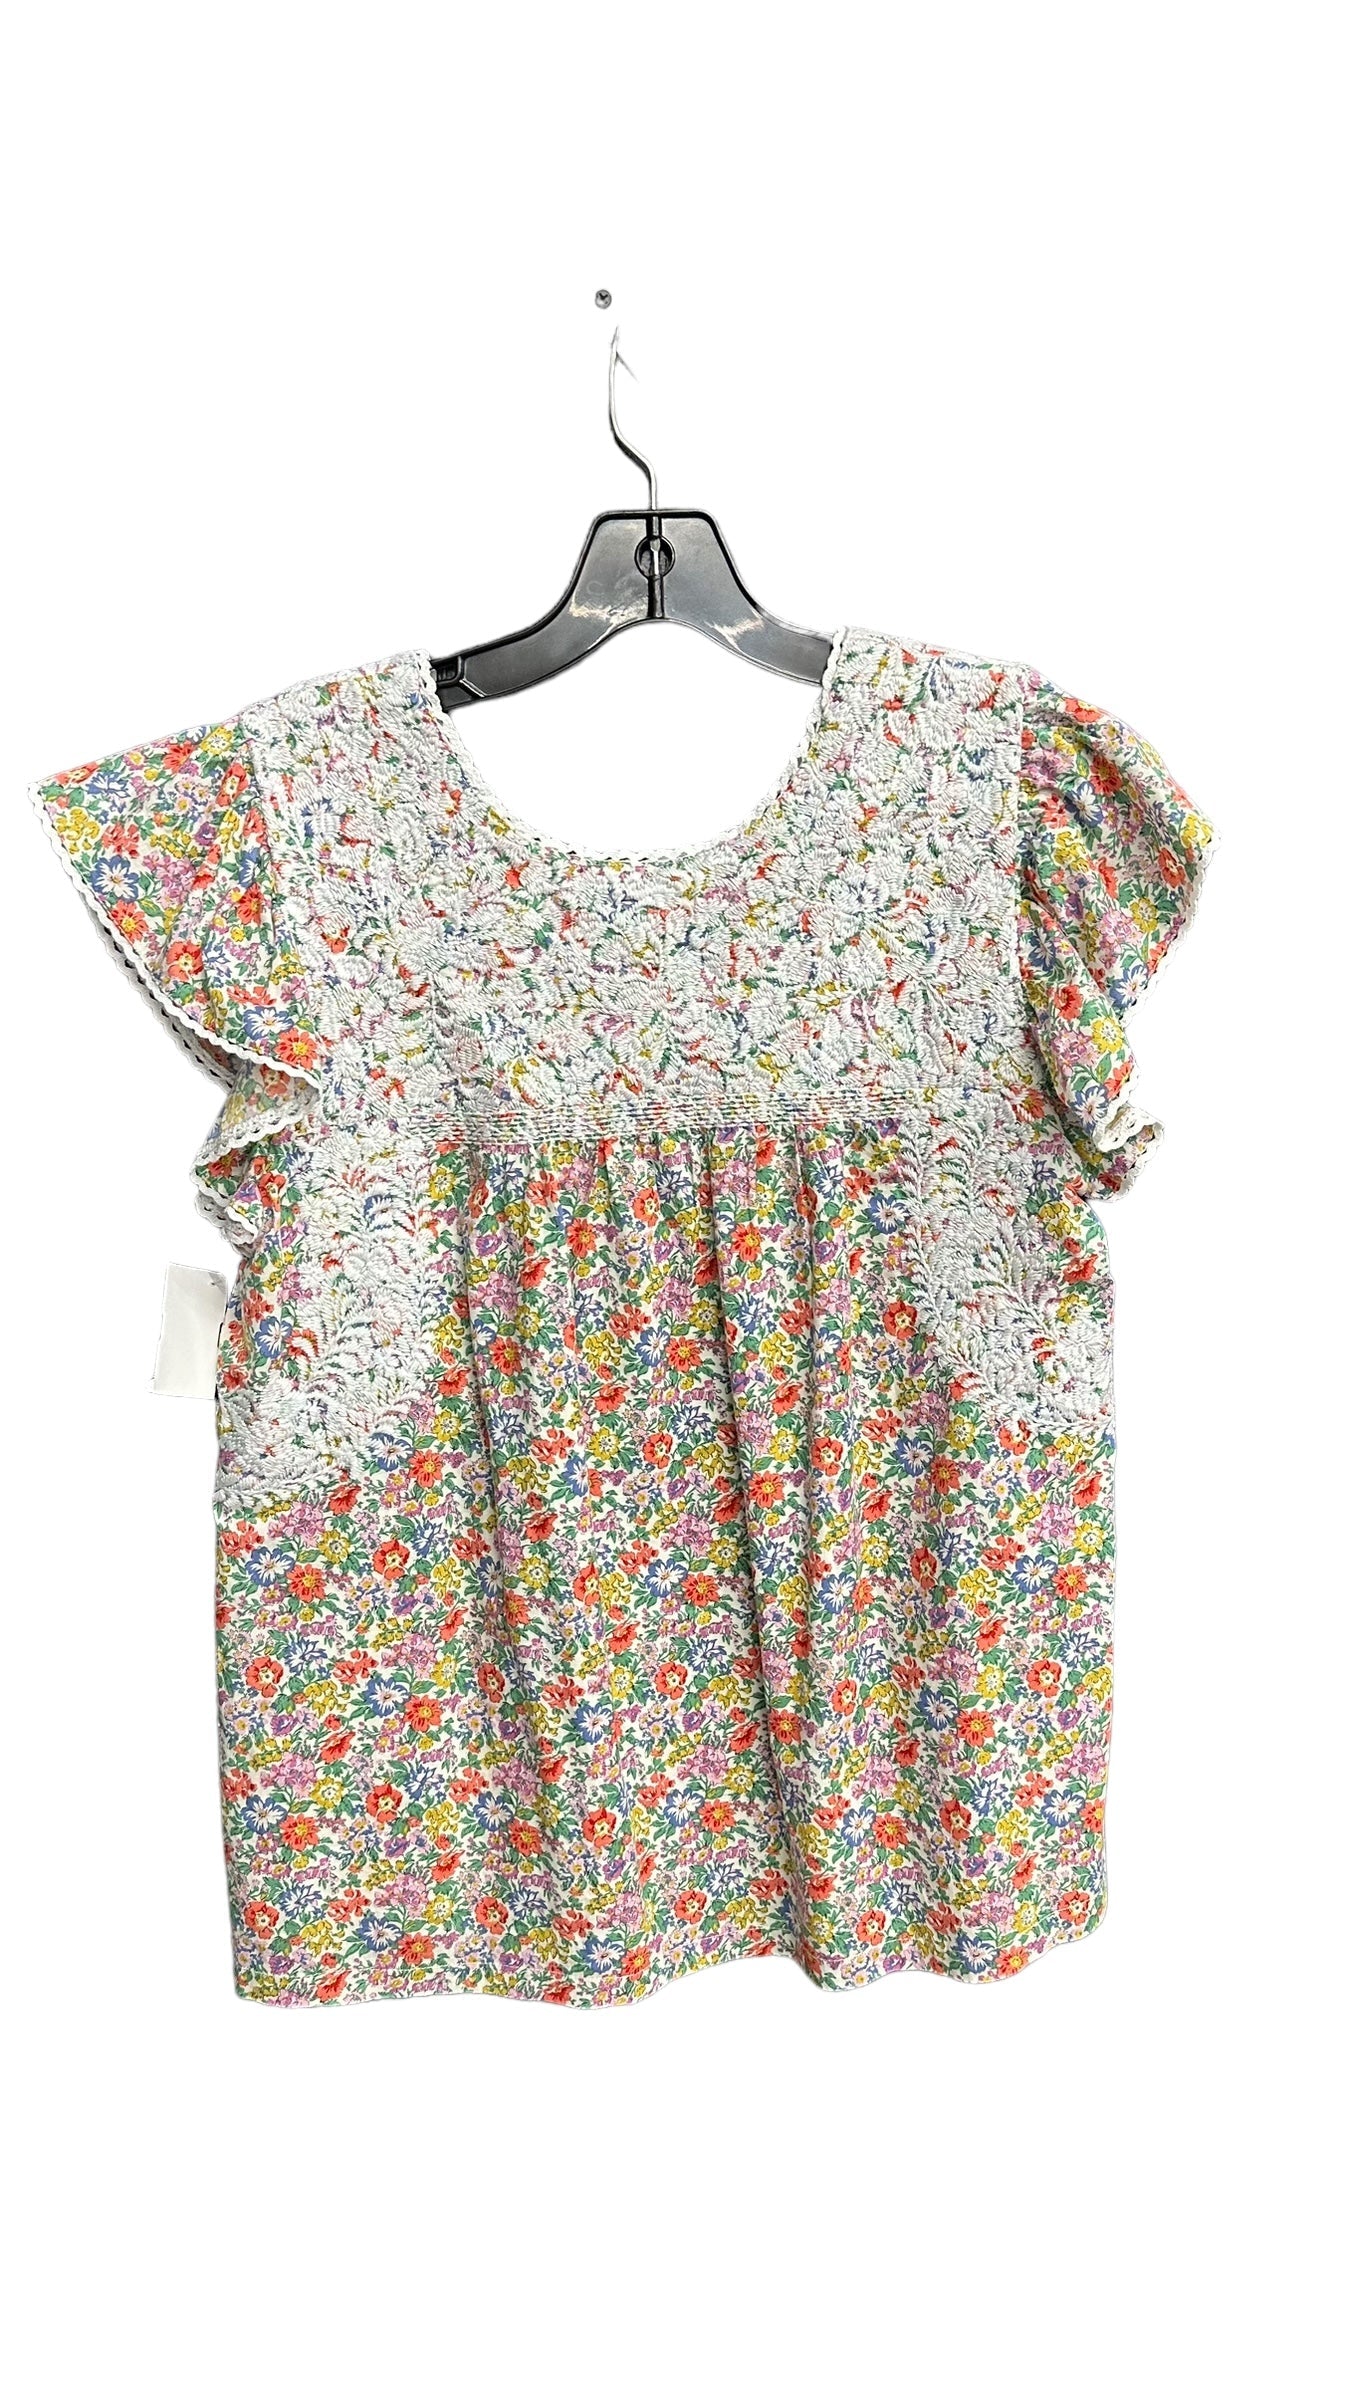 Multi-colored Top Short Sleeve Clothes Mentor, Size S